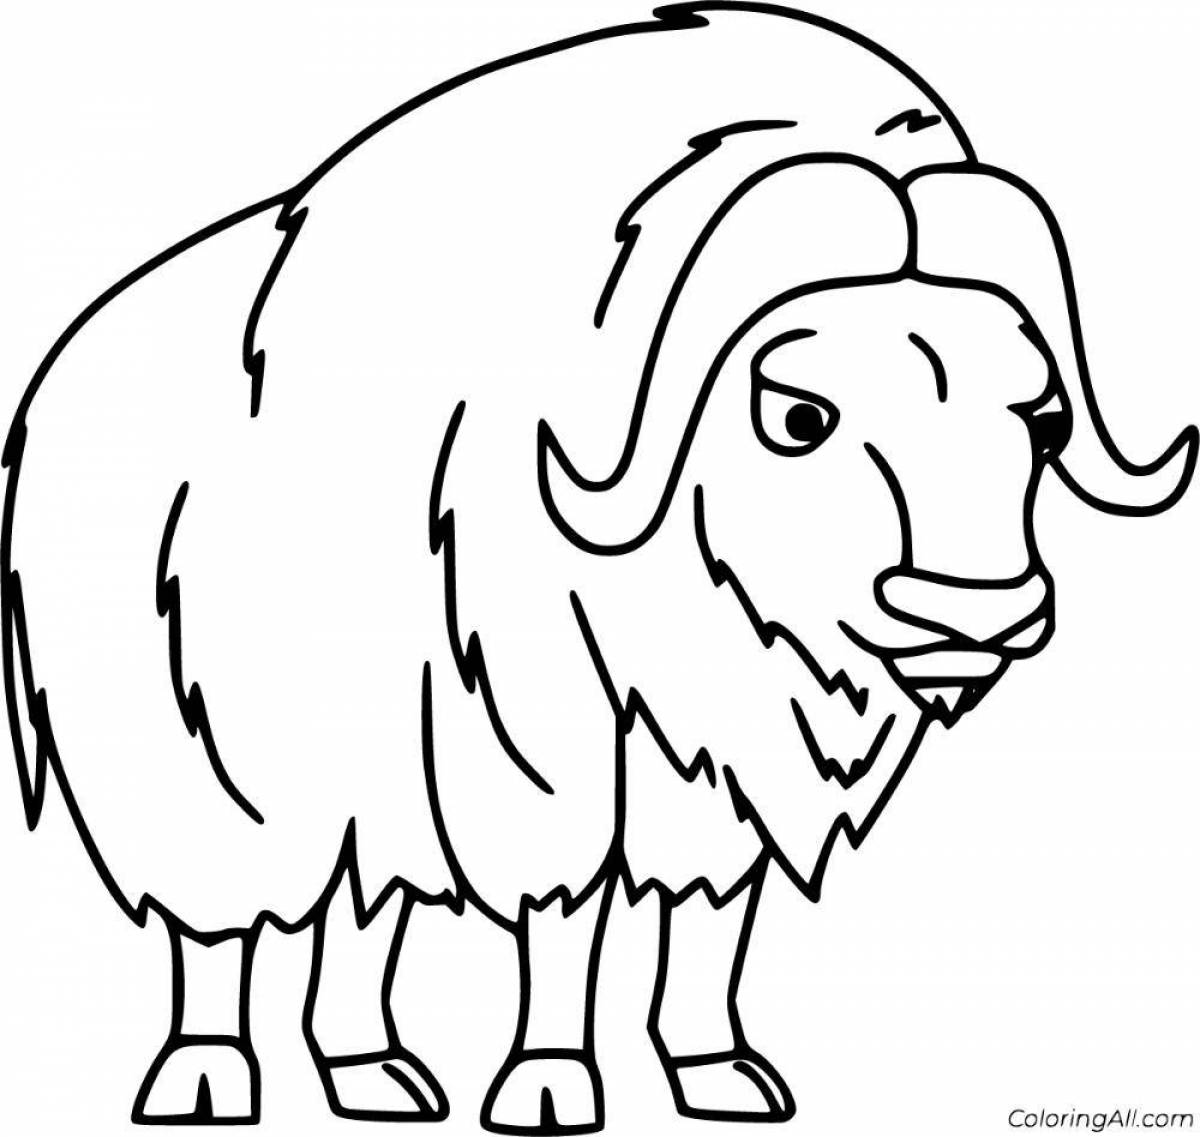 Playful musk ox coloring page for kids